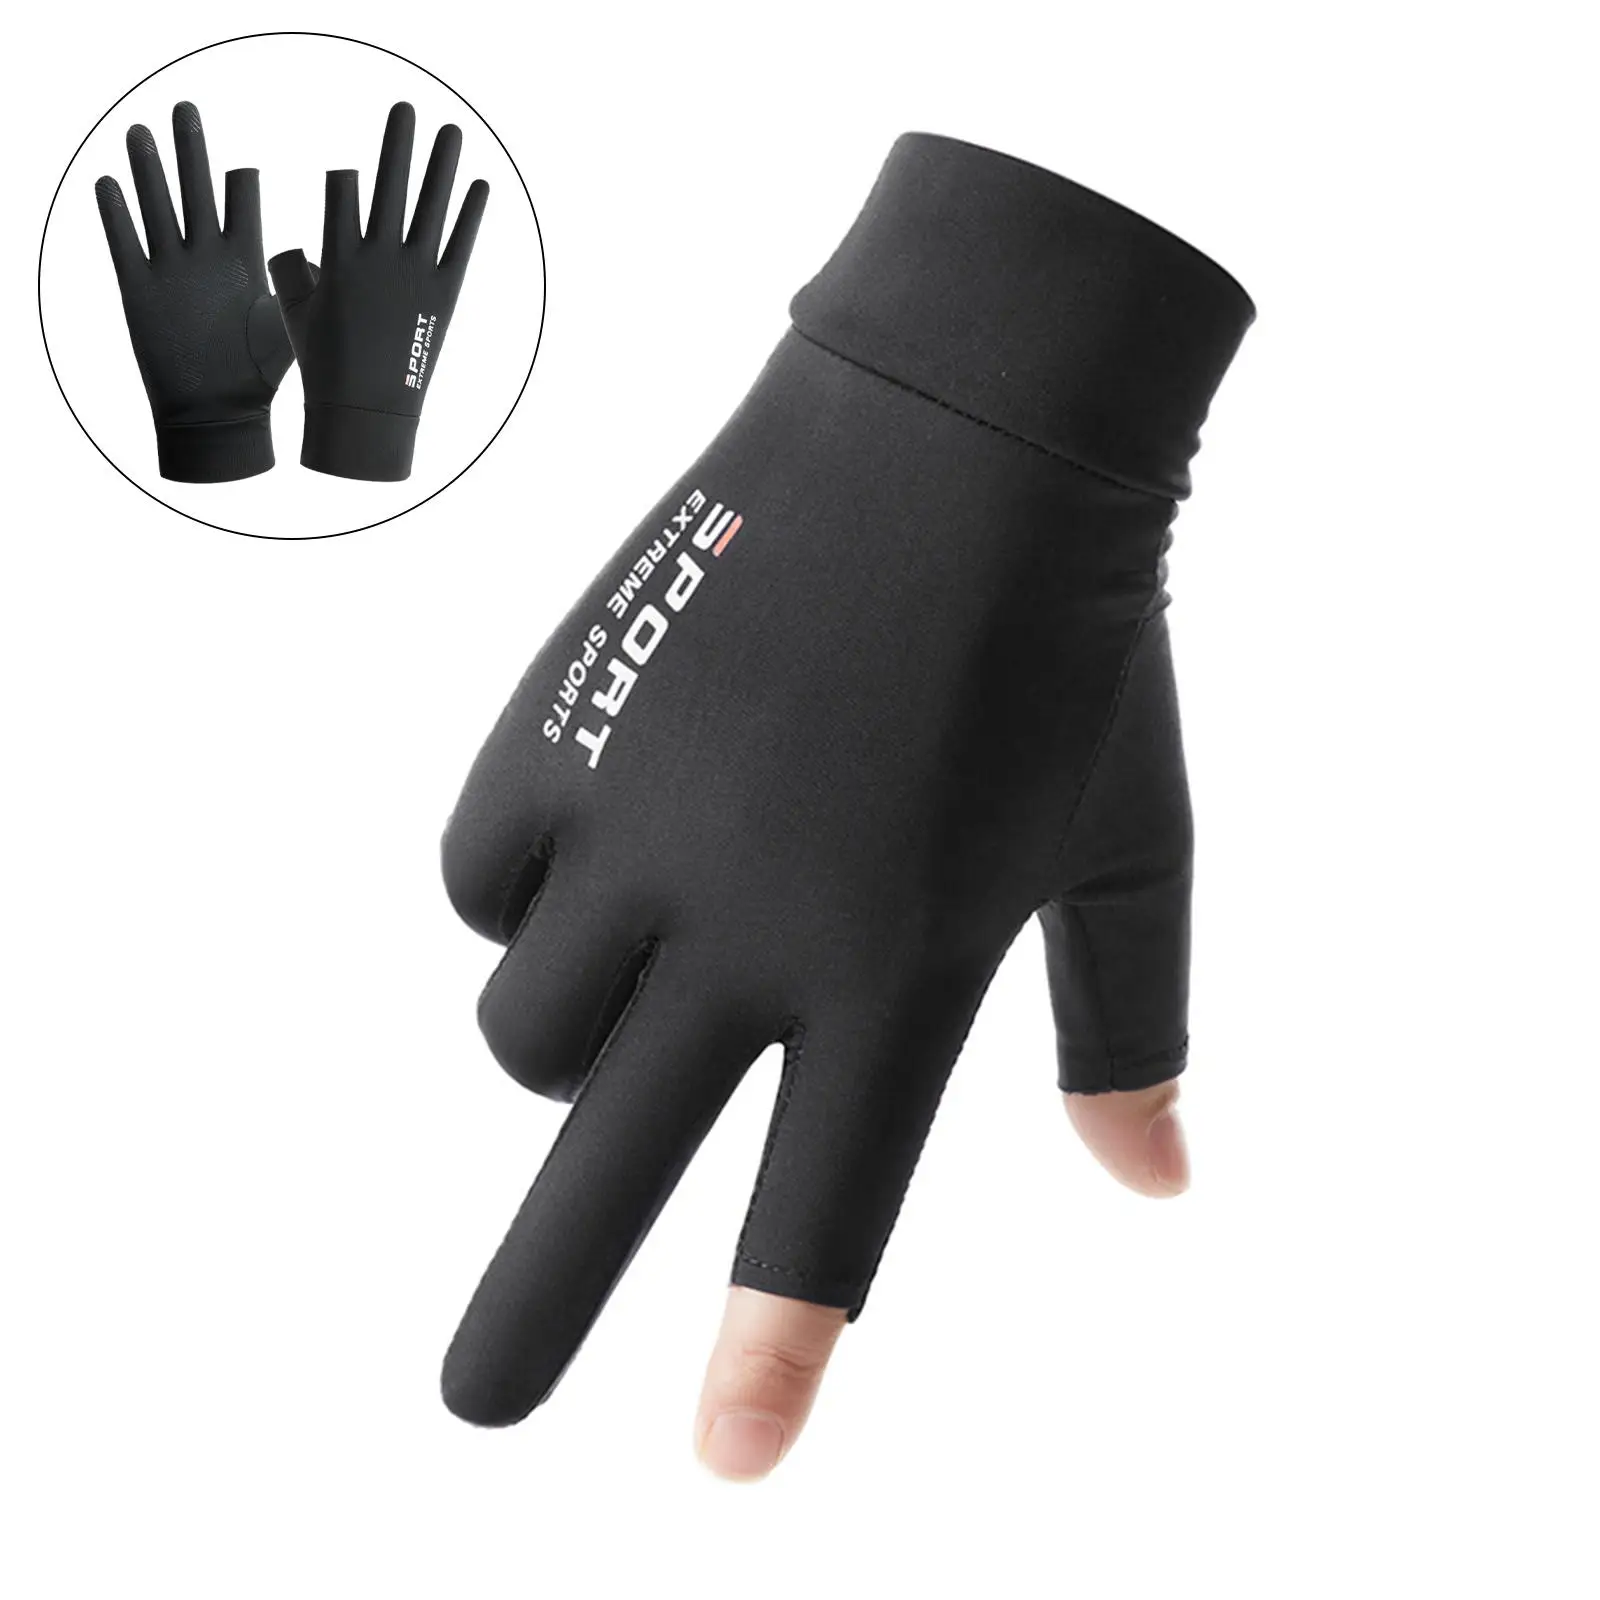 Sun  Fishing Gloves for , Comfortable Breathable Cycling Bike Gloves, Anti  Wear Resistant Workout Gloves for Hiking, Driving